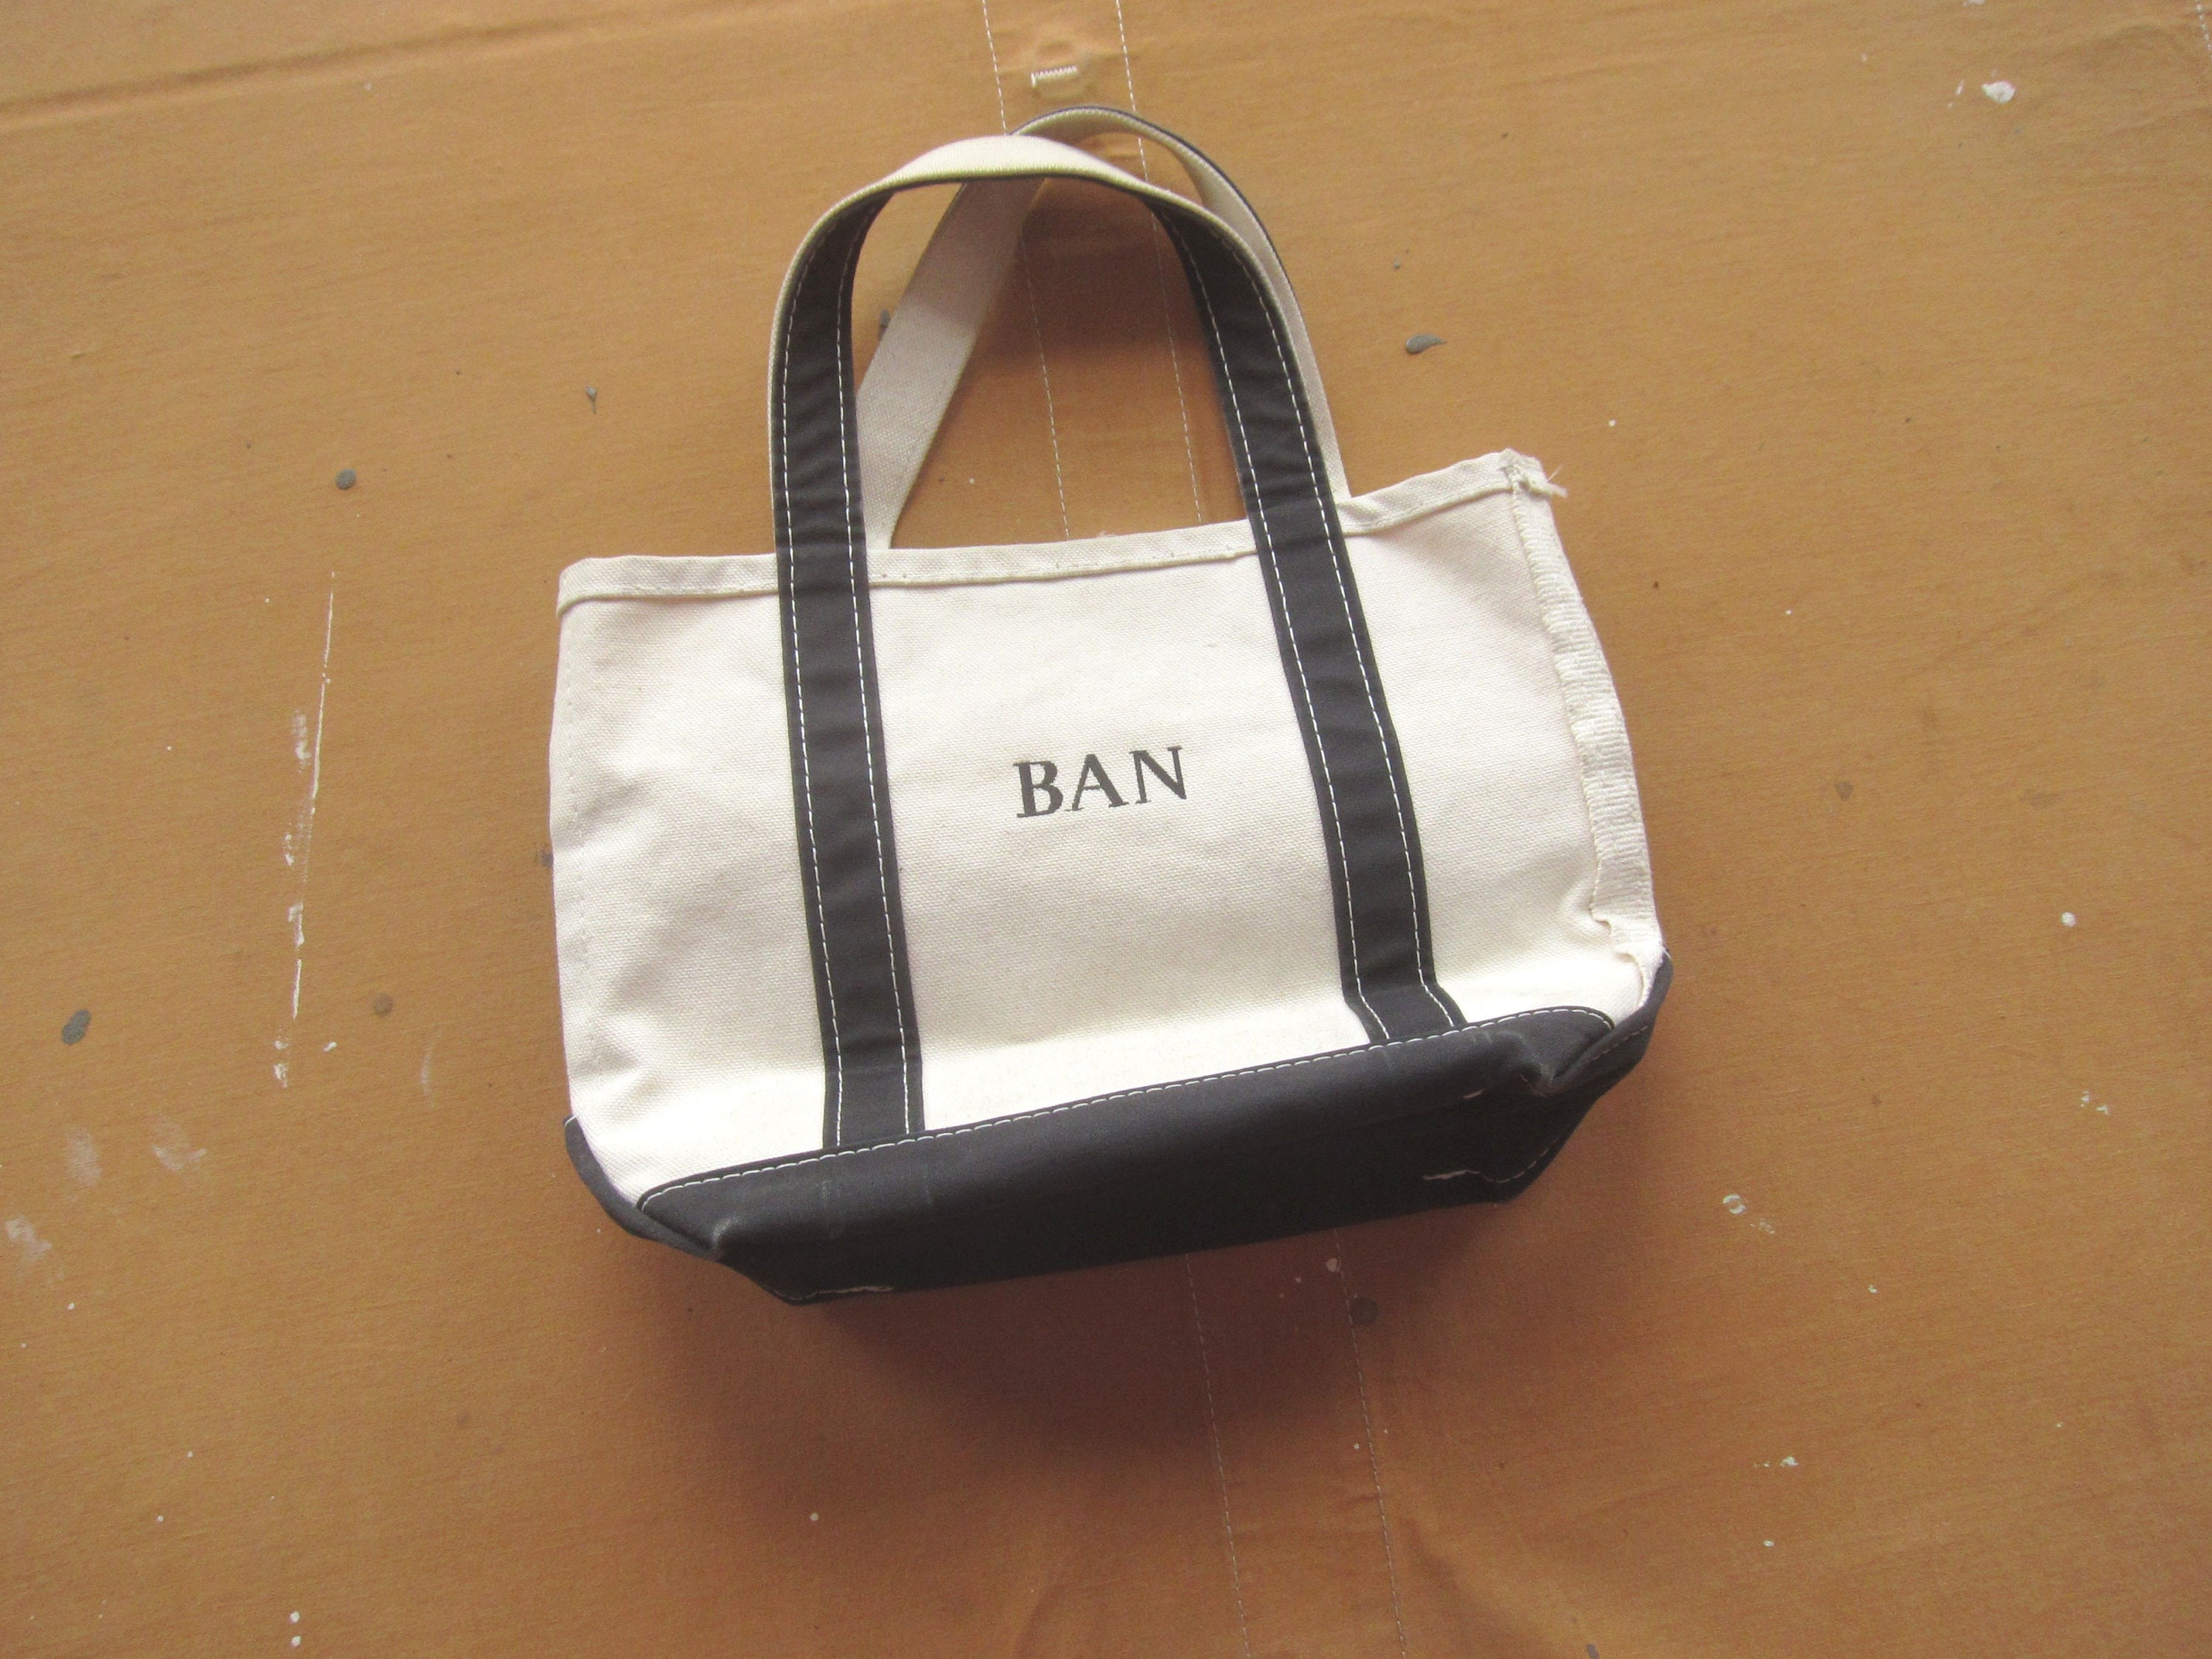 Boat and Tote Bag  L.L.Bean for Business